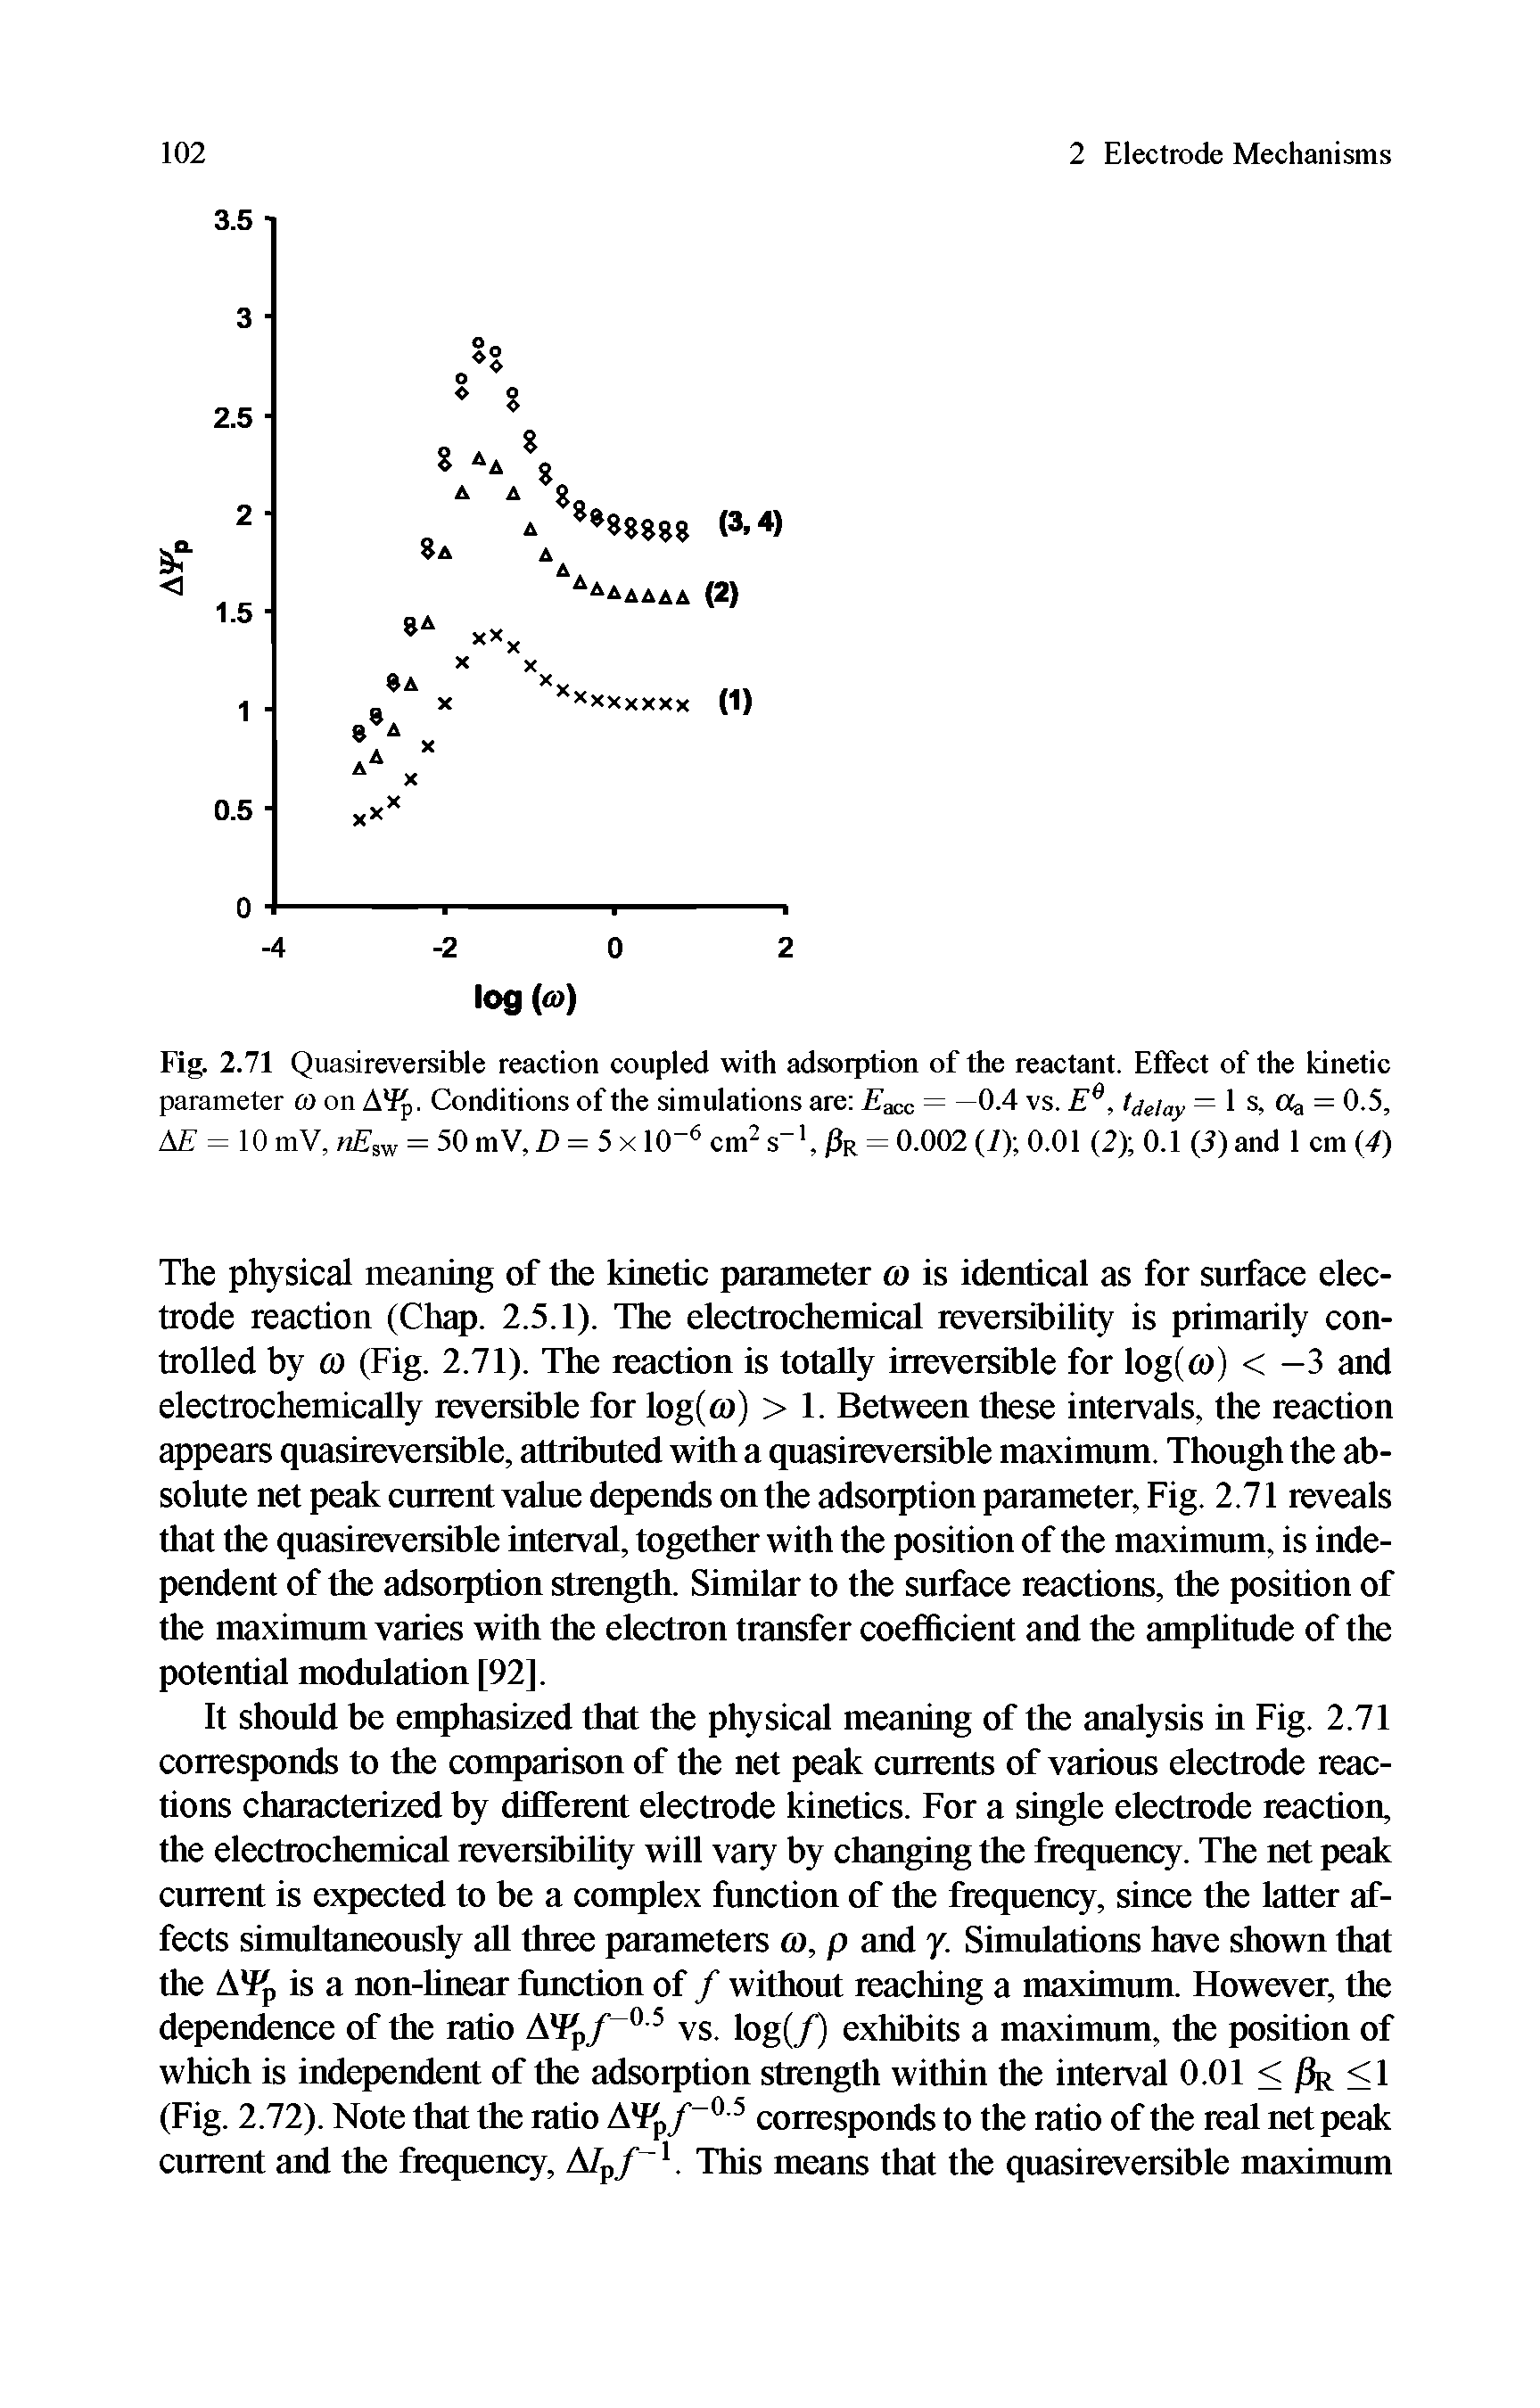 Fig. 2.71 Quasireversible reaction coupled with adsorption of the reactant. Effect of the kinetic...